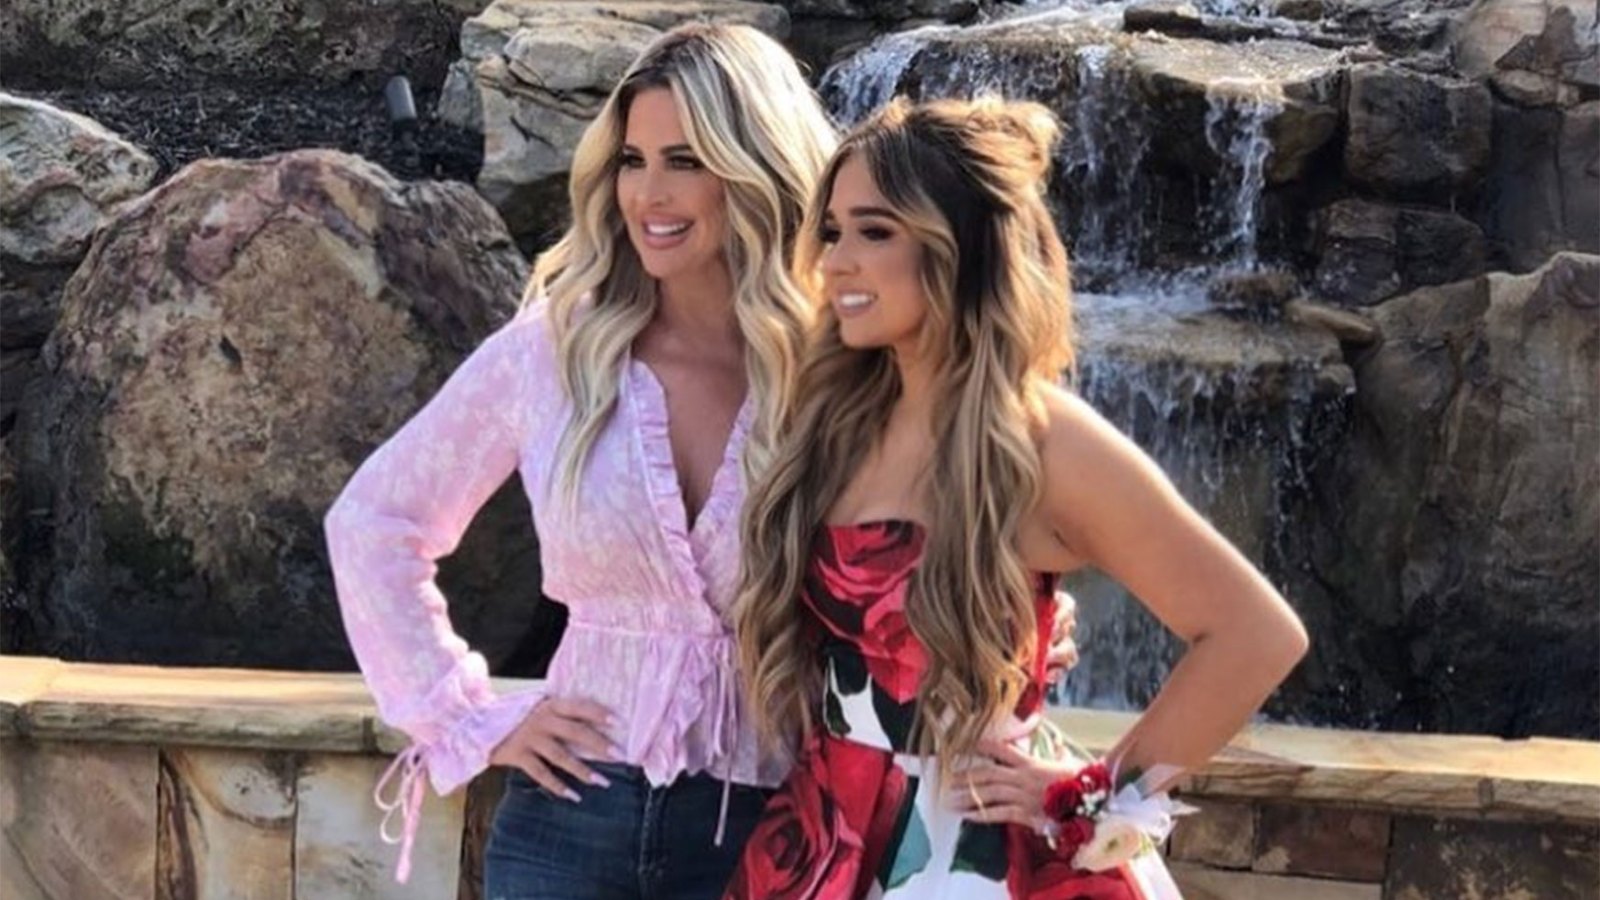 Kim Zolciak Admits She ‘Paid for a Stomach’ as Daughter Ariana Biermann Struggles With Insecurities